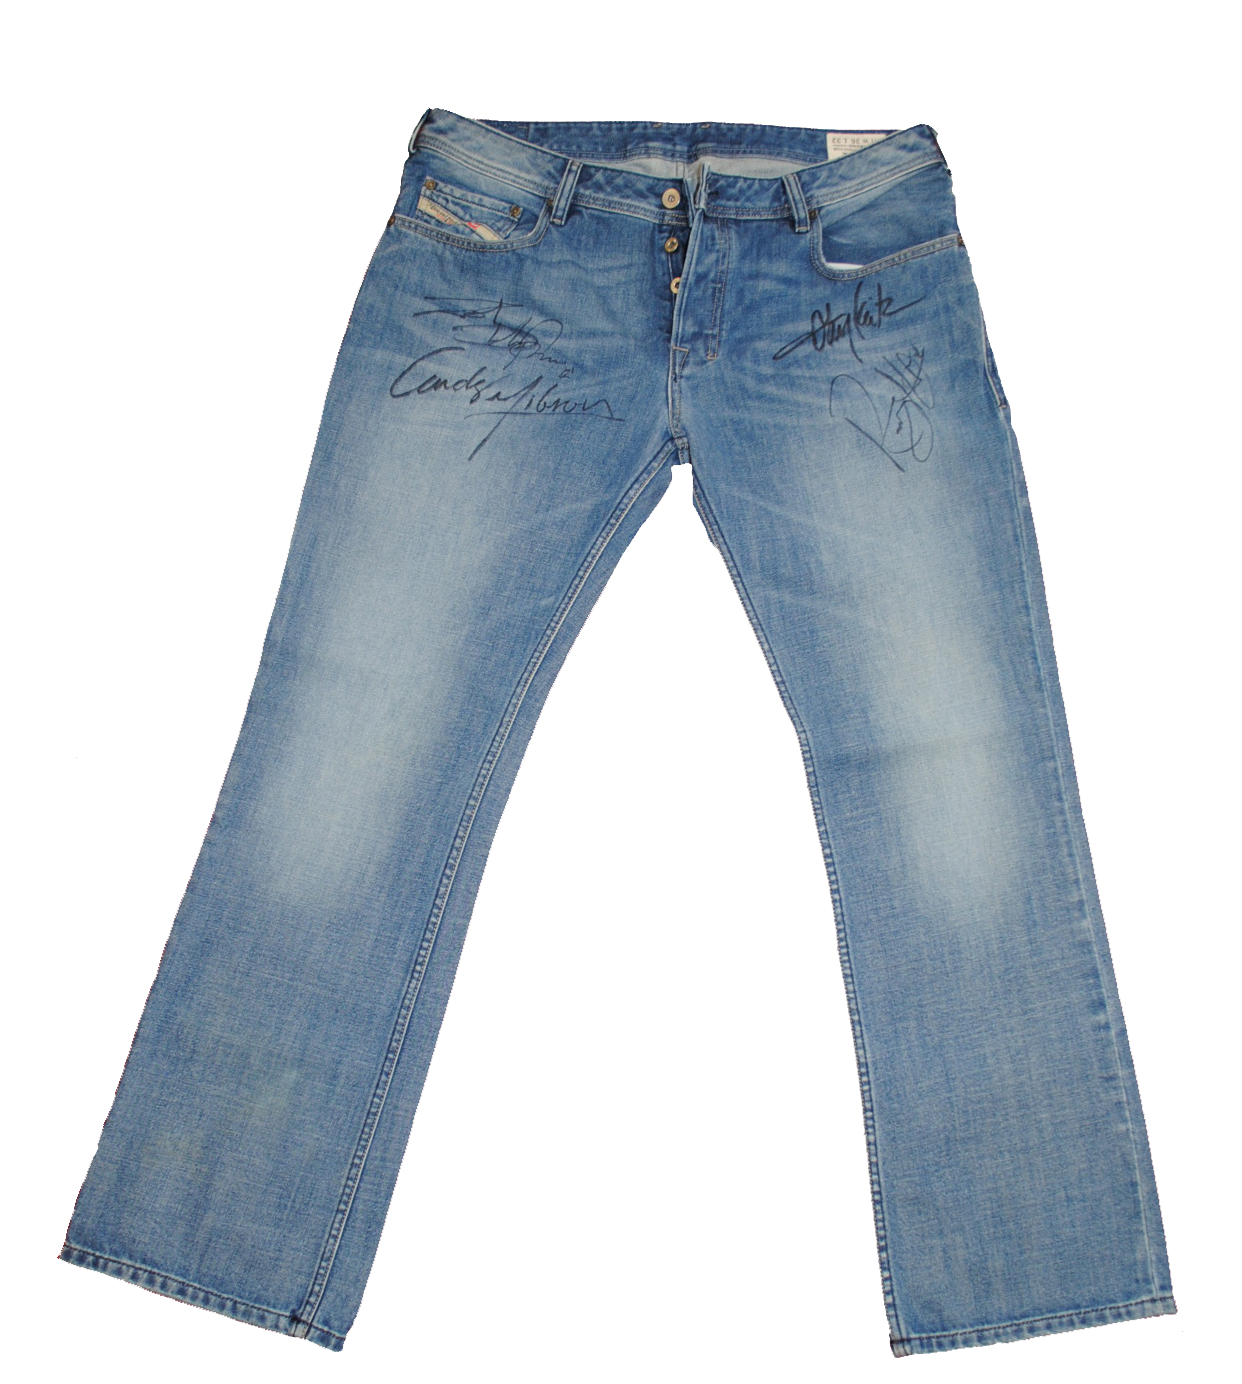 Blue Jeans Free Clipart HQ PNG Image